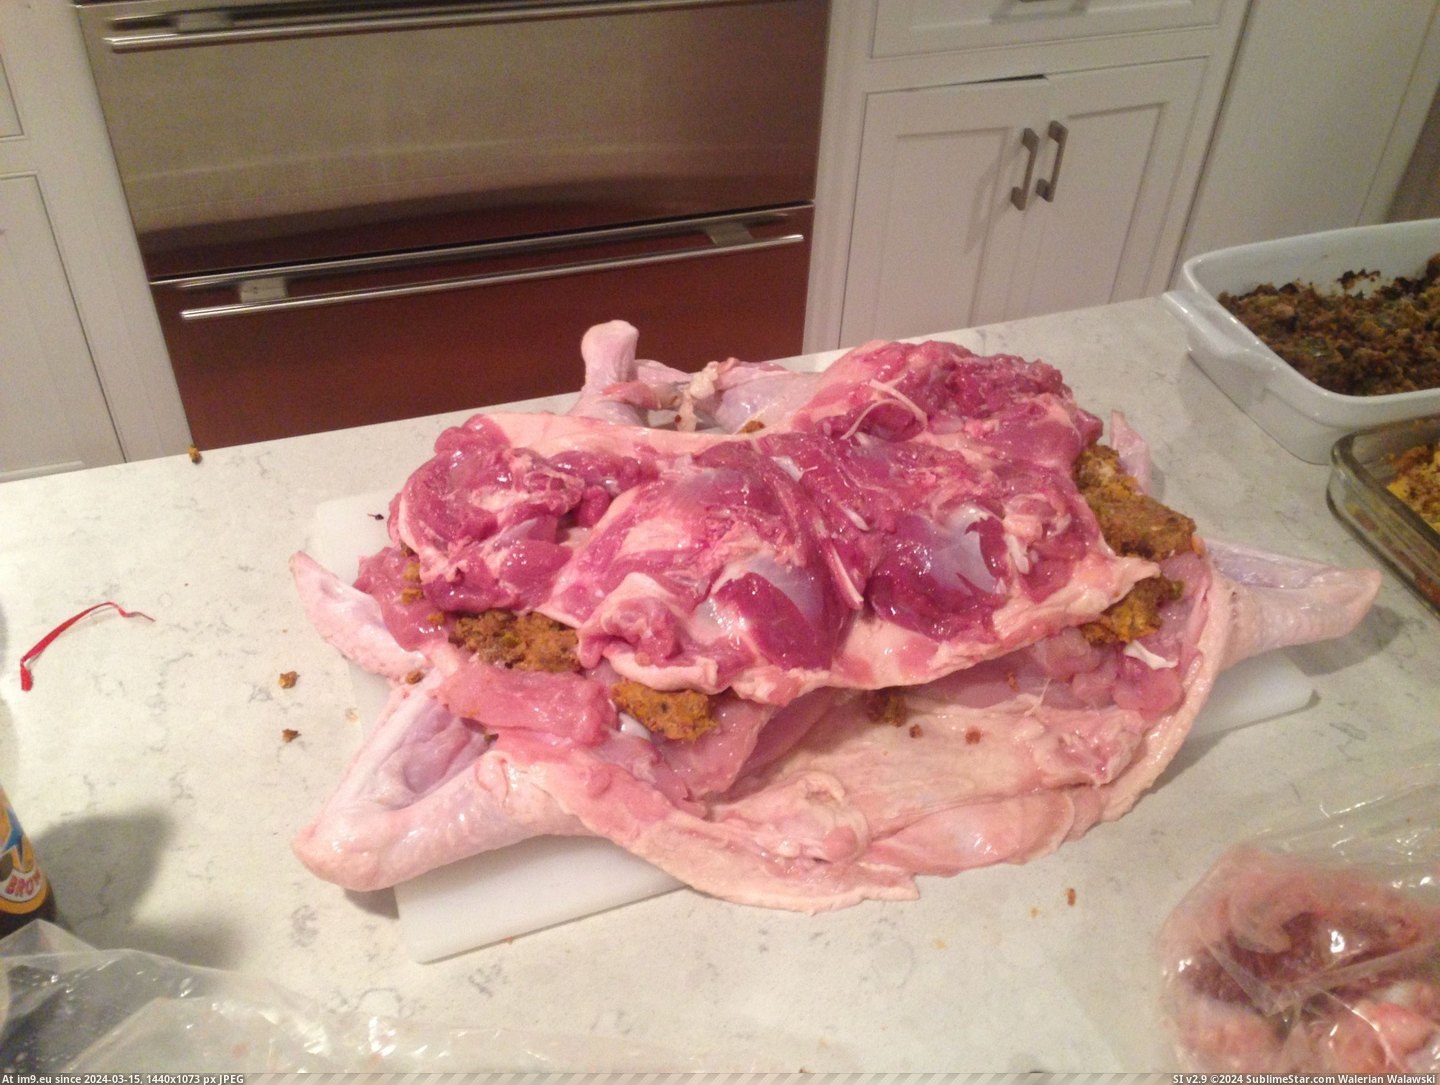 #For #Year #Thought #Thanksgiving #Duck #Turkey #Turducken #Family #See #Chicken [Pics] My family makes turducken (a chicken in a duck in a turkey) every year for Thanksgiving. Thought reddit would like to see Pic. (Изображение из альбом My r/PICS favs))